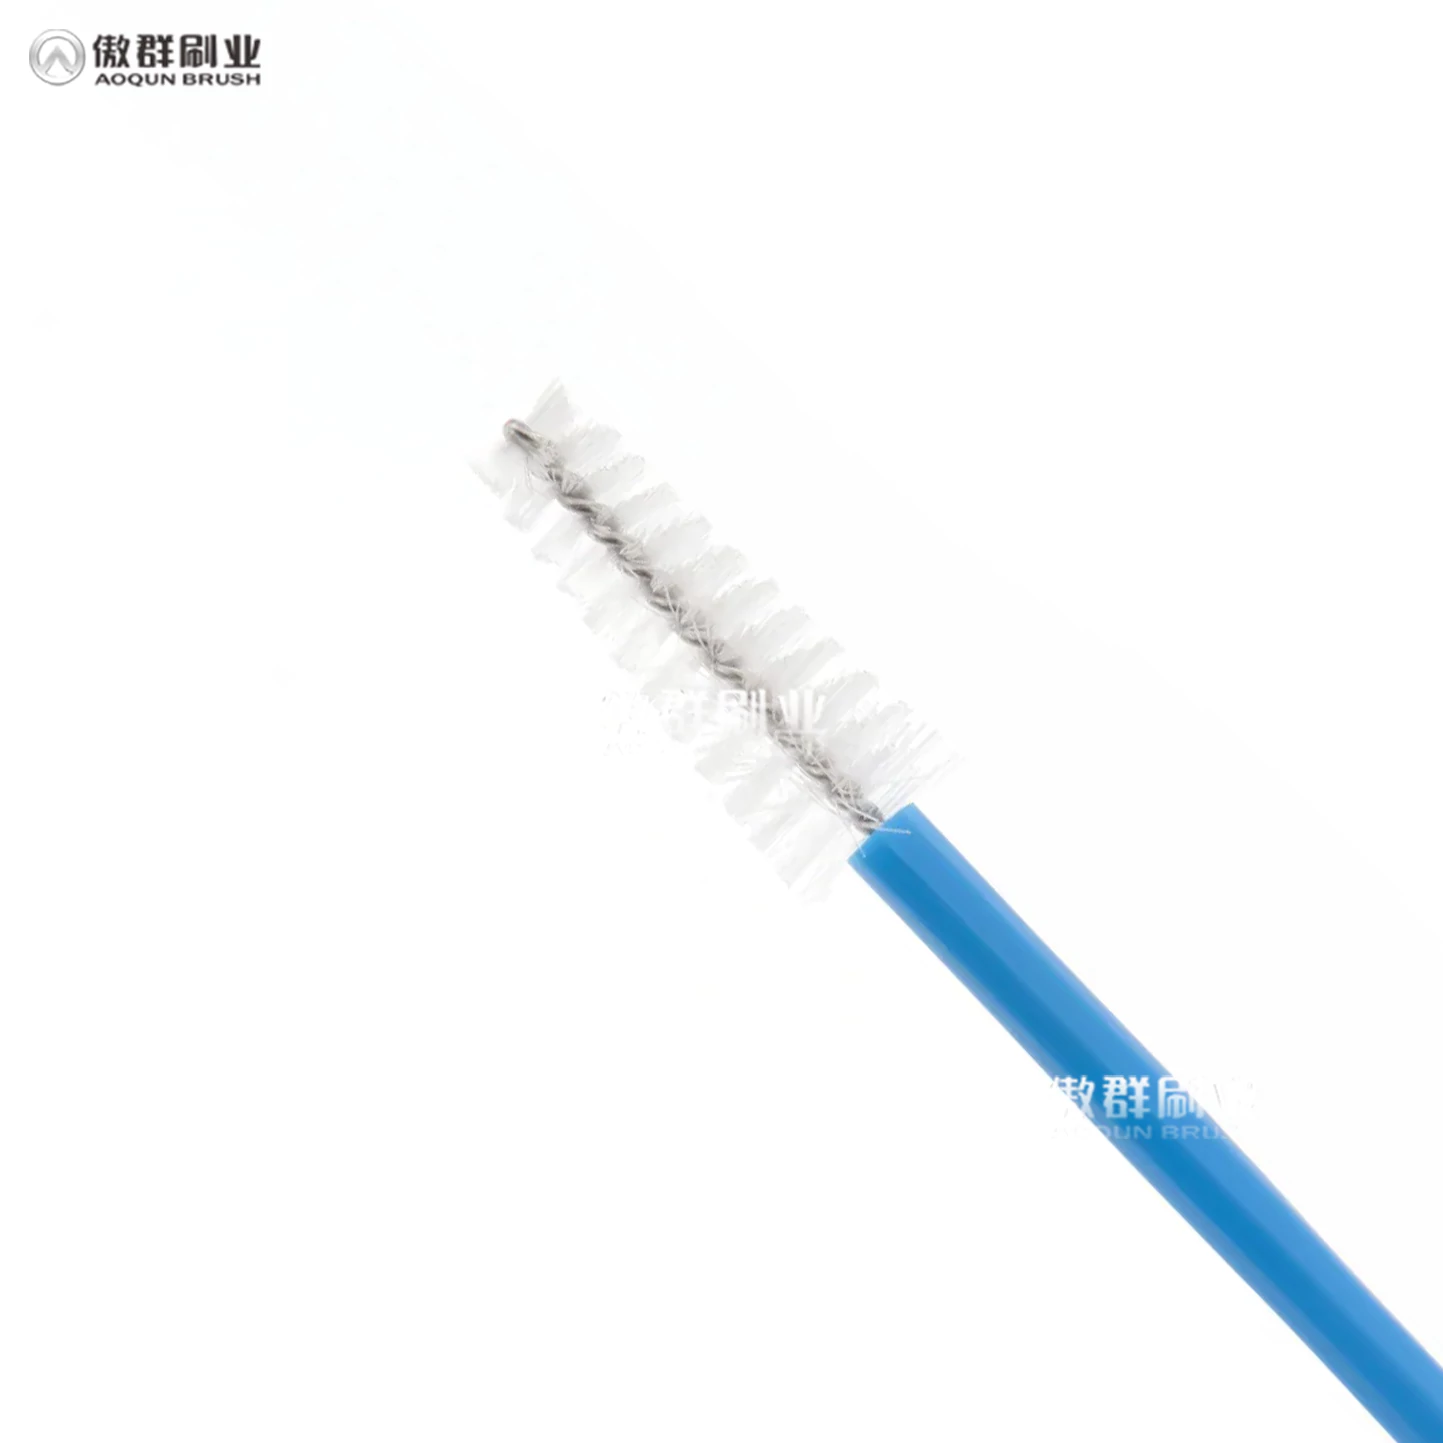 Cervical Cytology Brushes for collecting cell